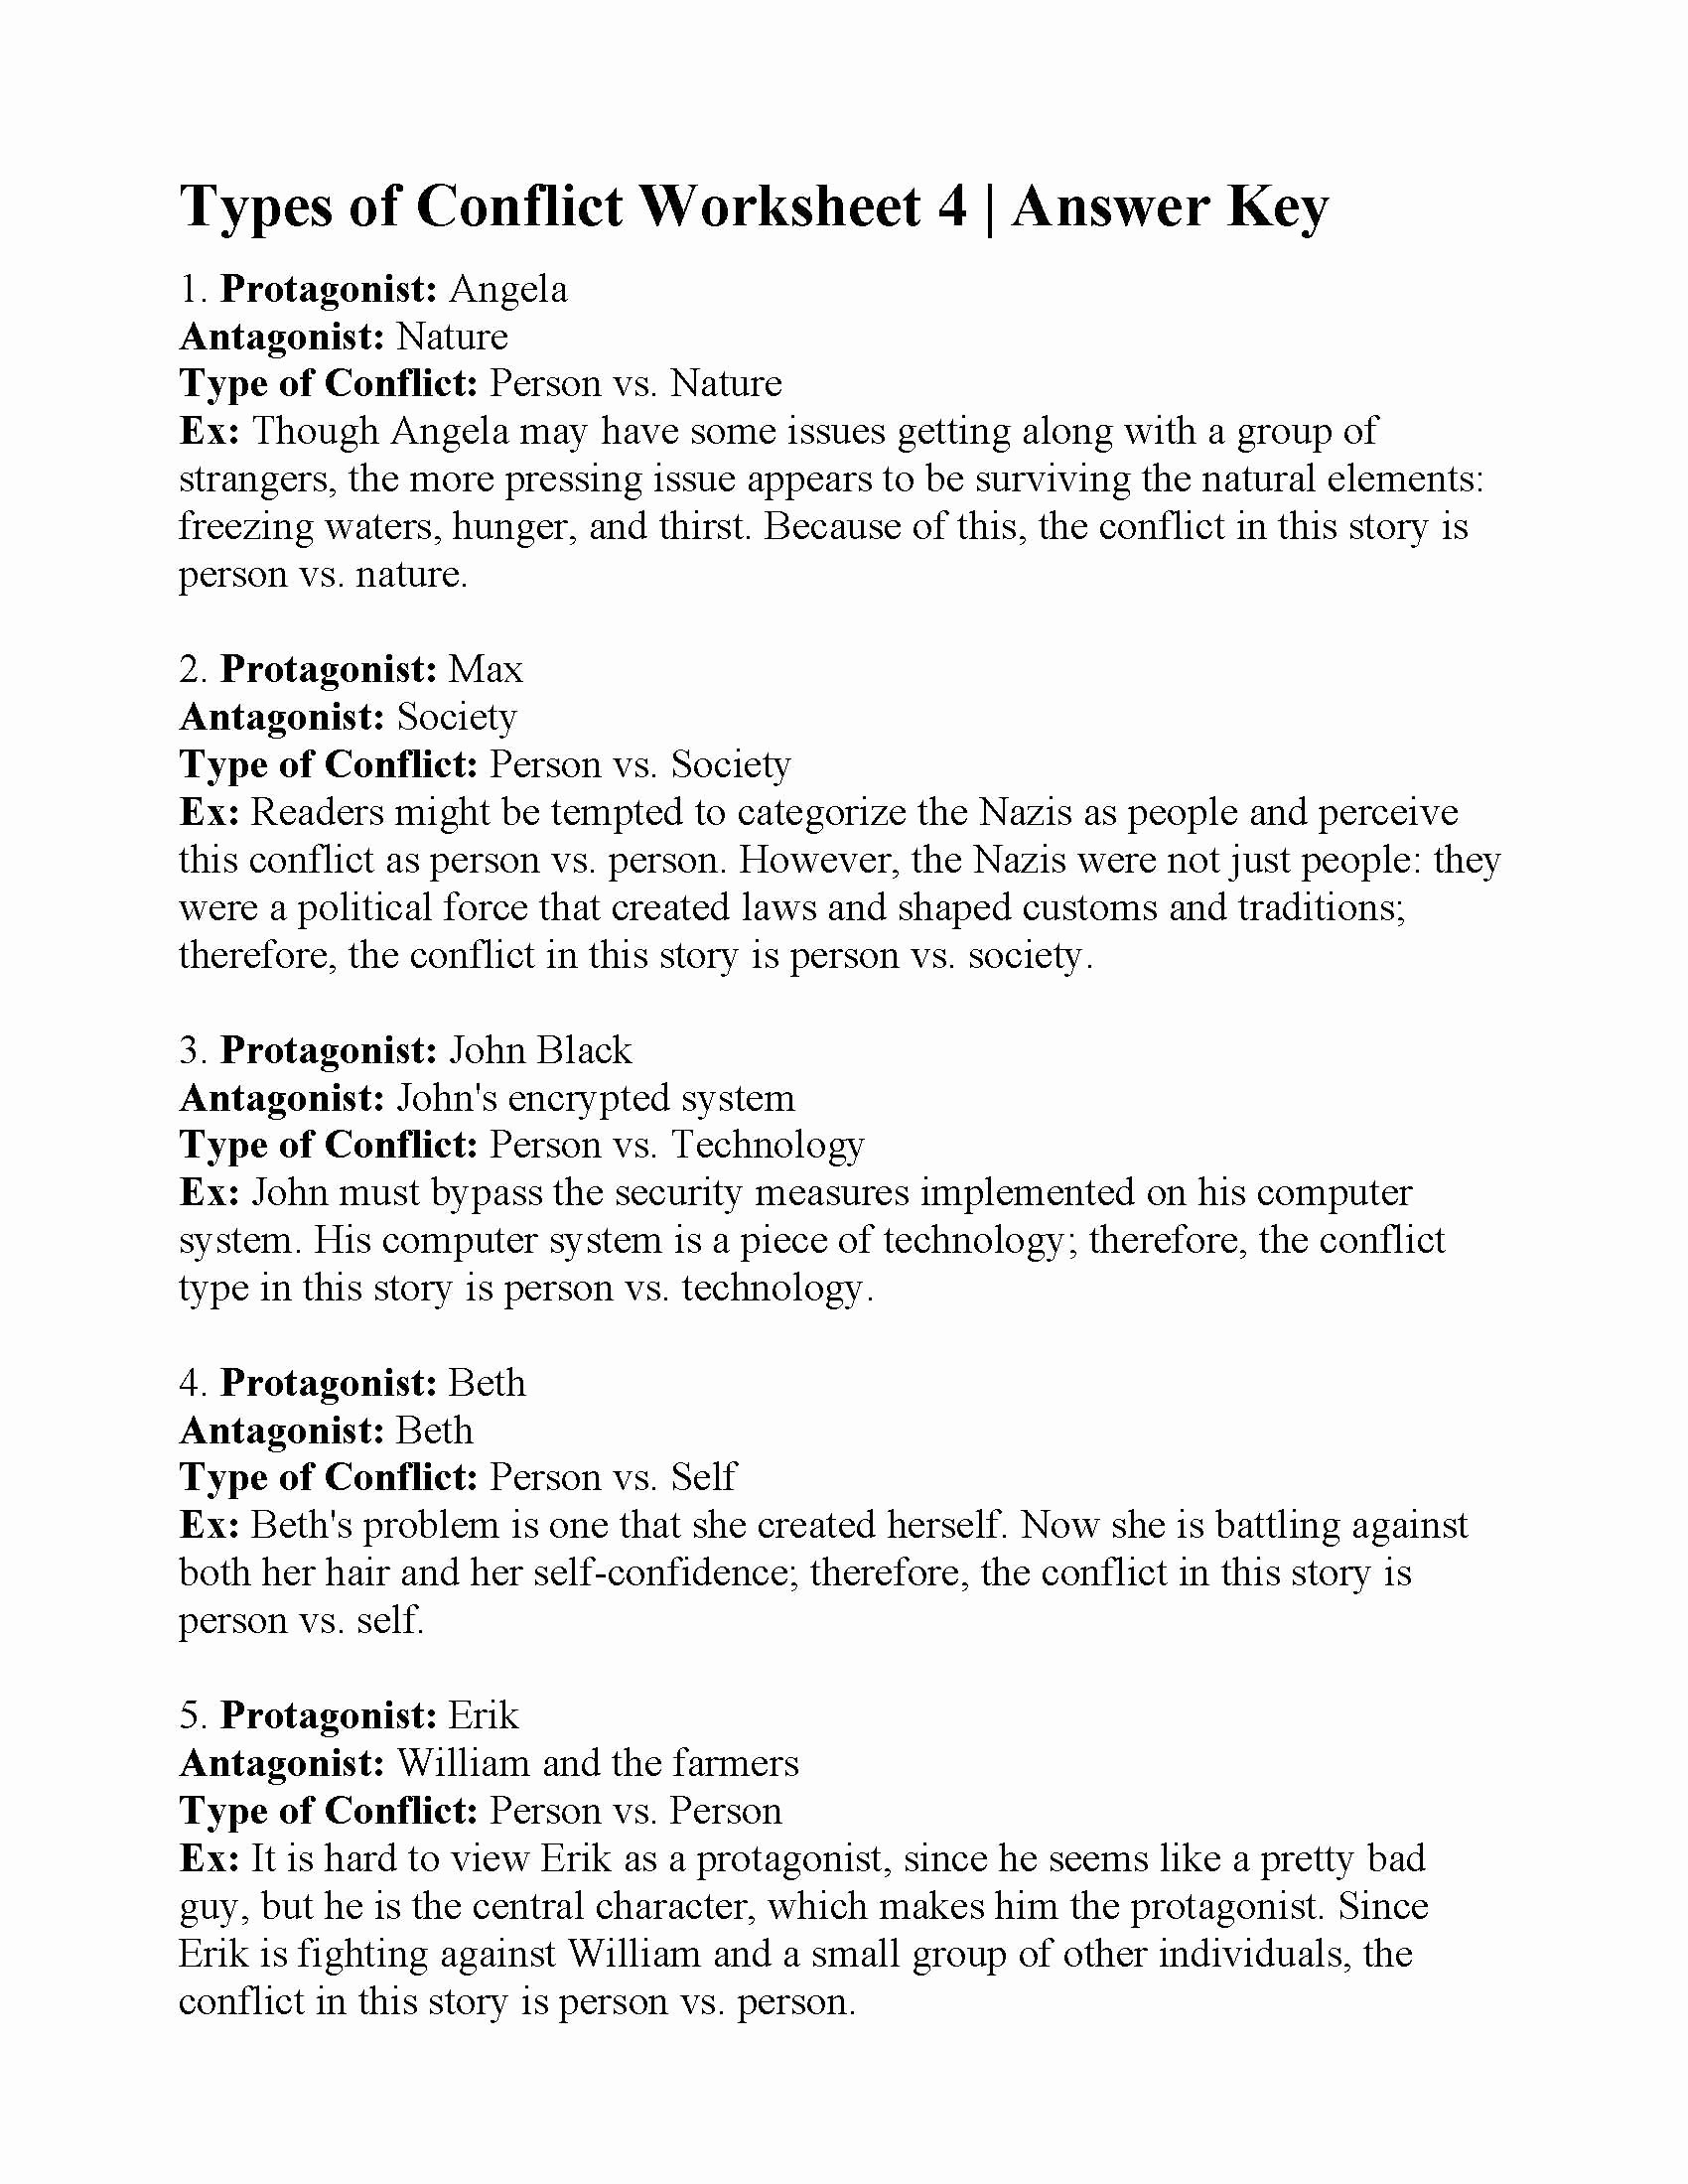 Types Of Conflict Worksheet Lovely This is the Answer Key for the Types Of Conflict Worksheet